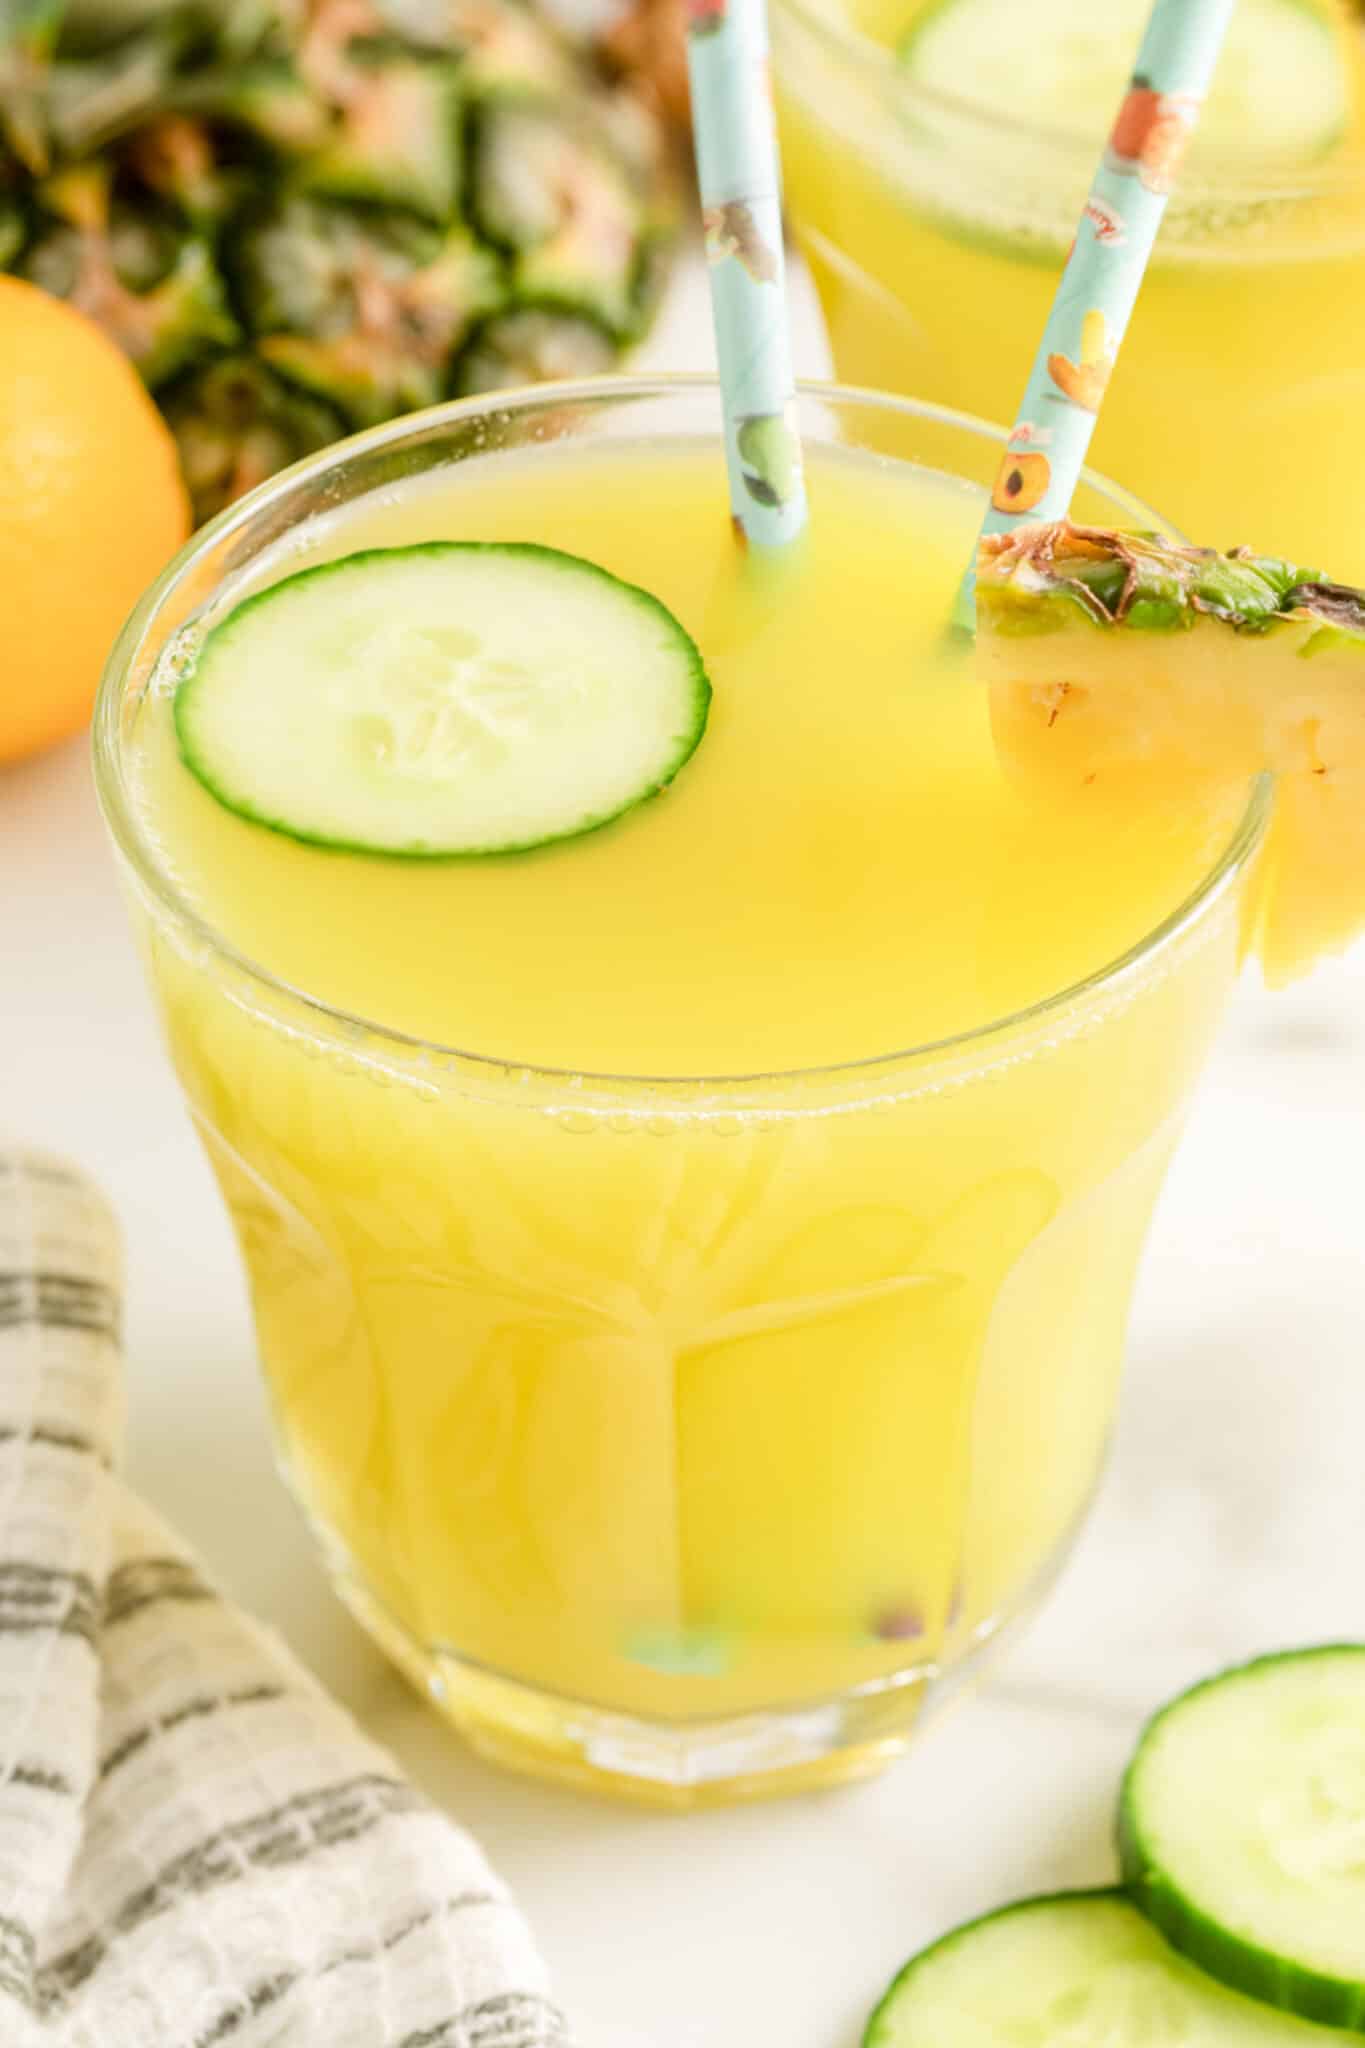 Closeup of a glass of pineapple cucumber juice with two straws.